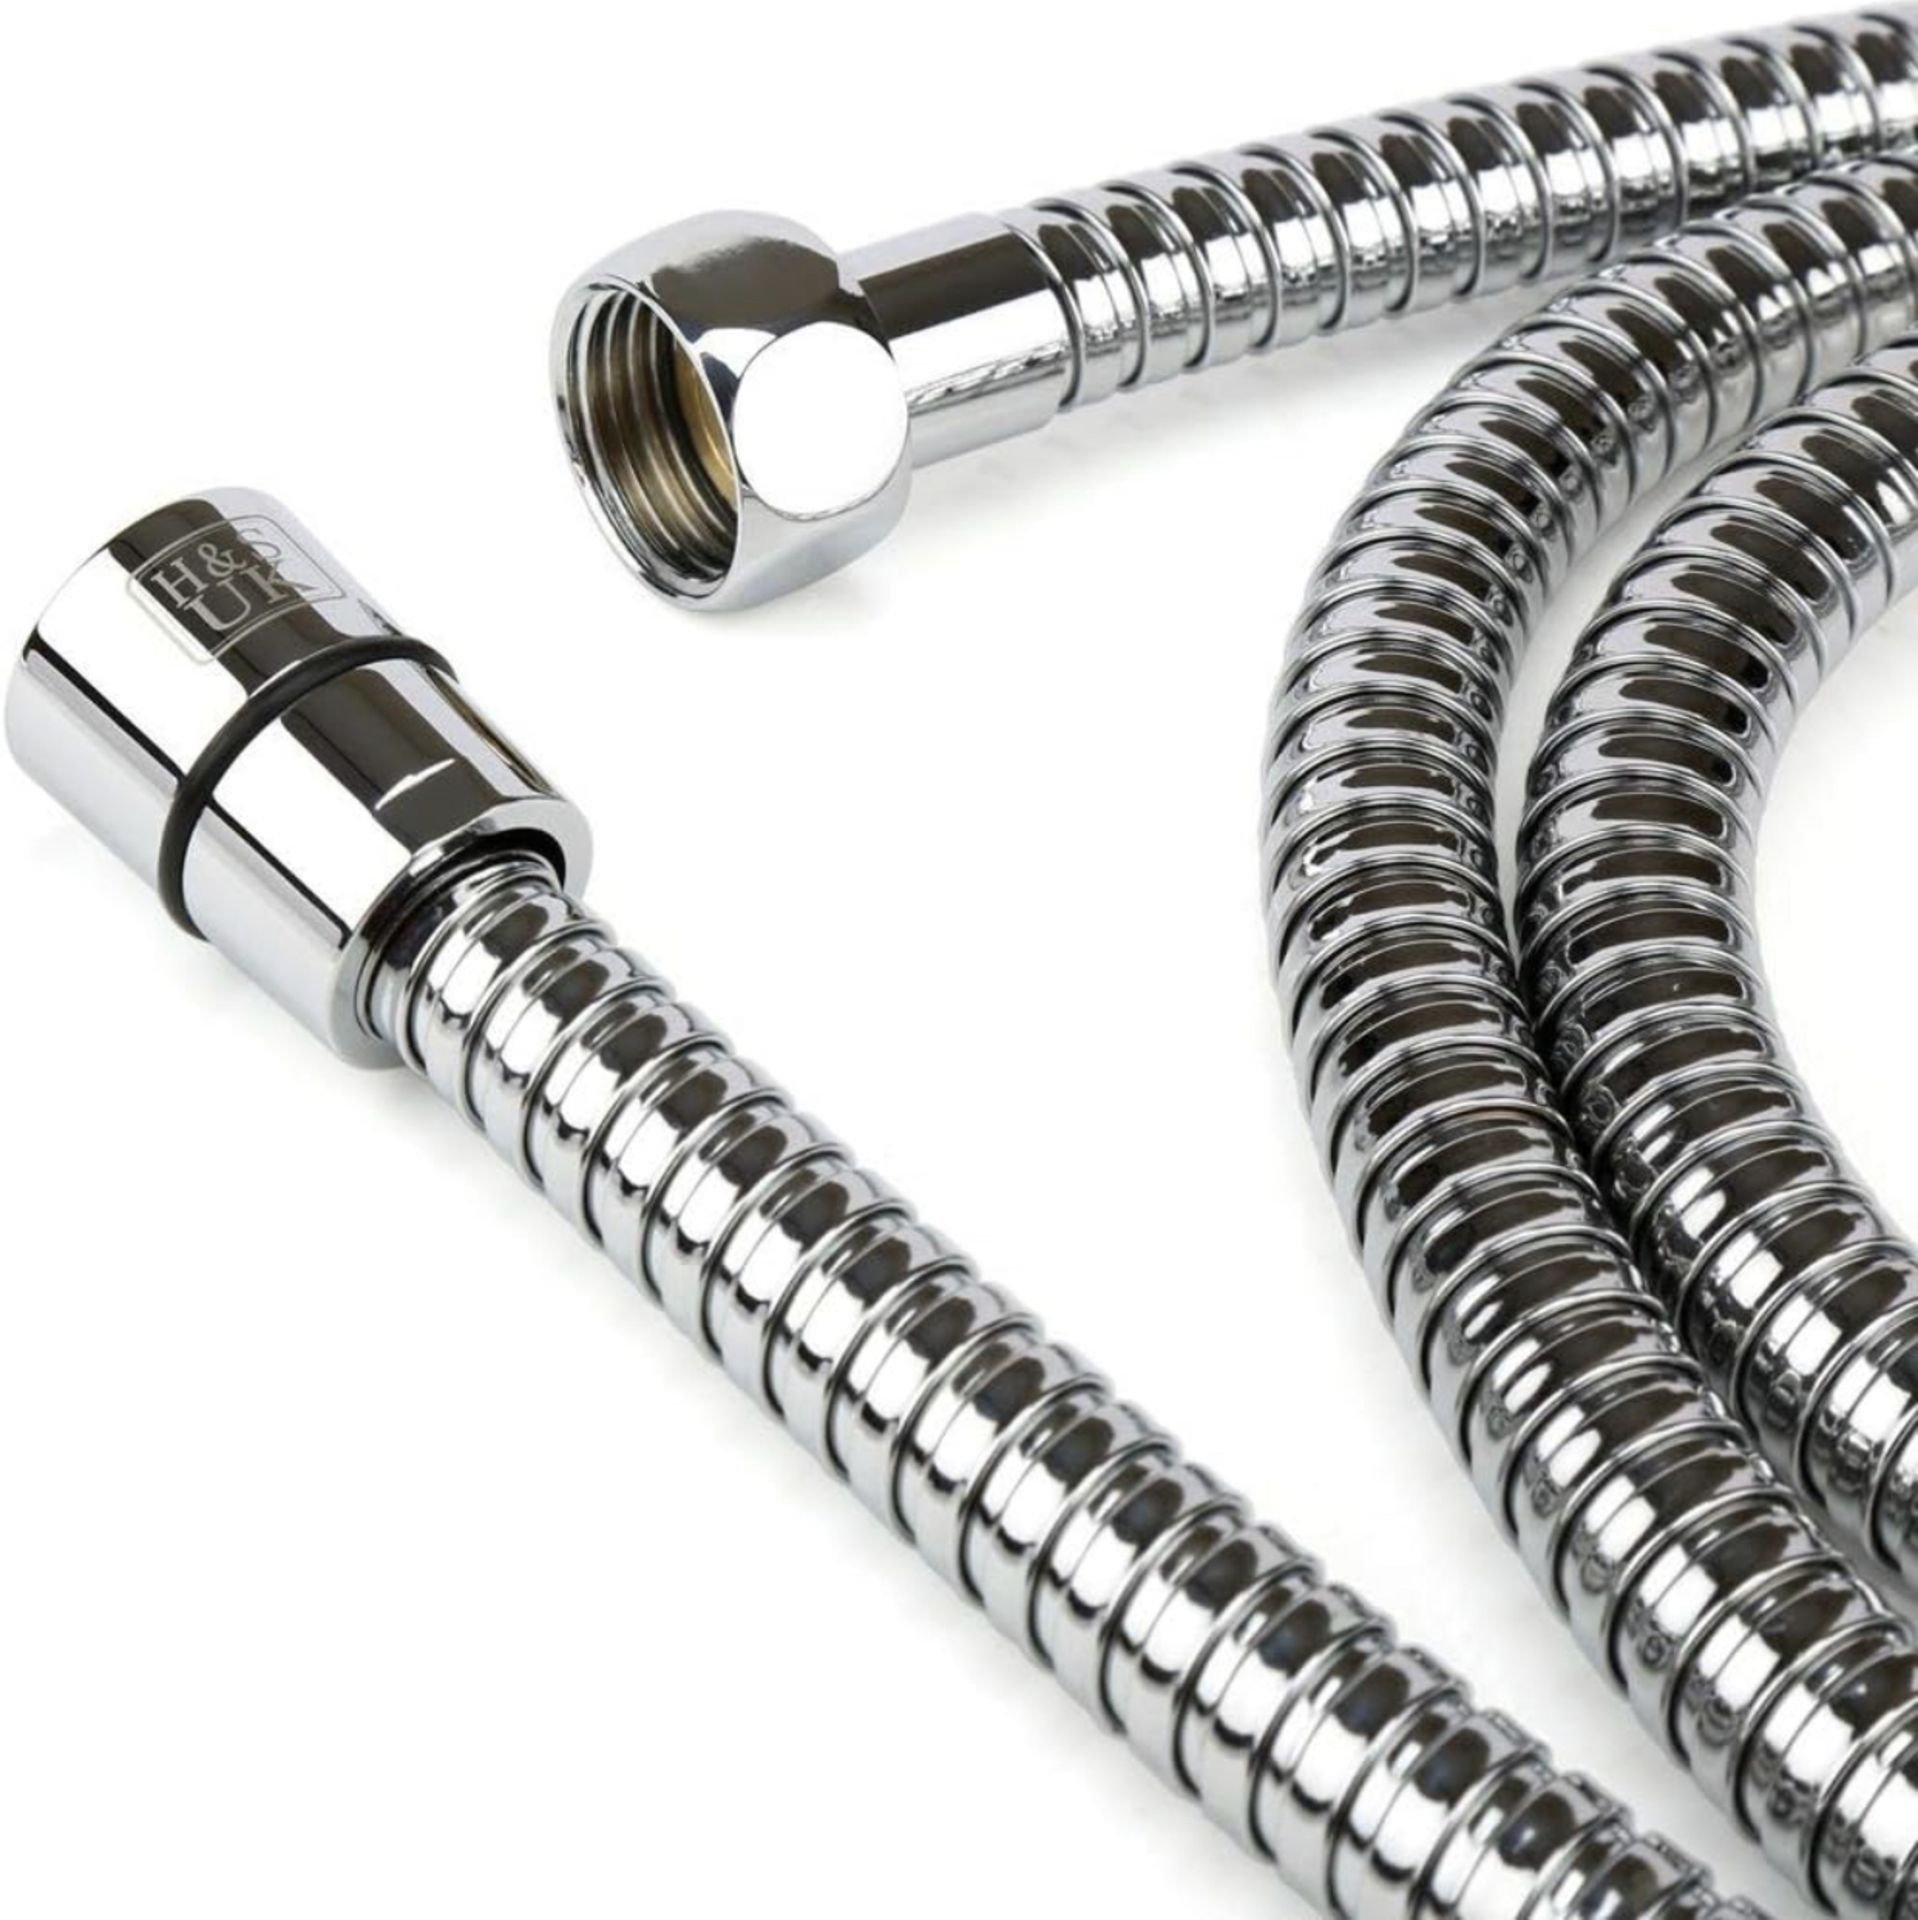 RRP £27 Set of 3 x H&S 1.75cm 69" Stainless Steel Replacement Shower Hose Anti-Kink - Chrome